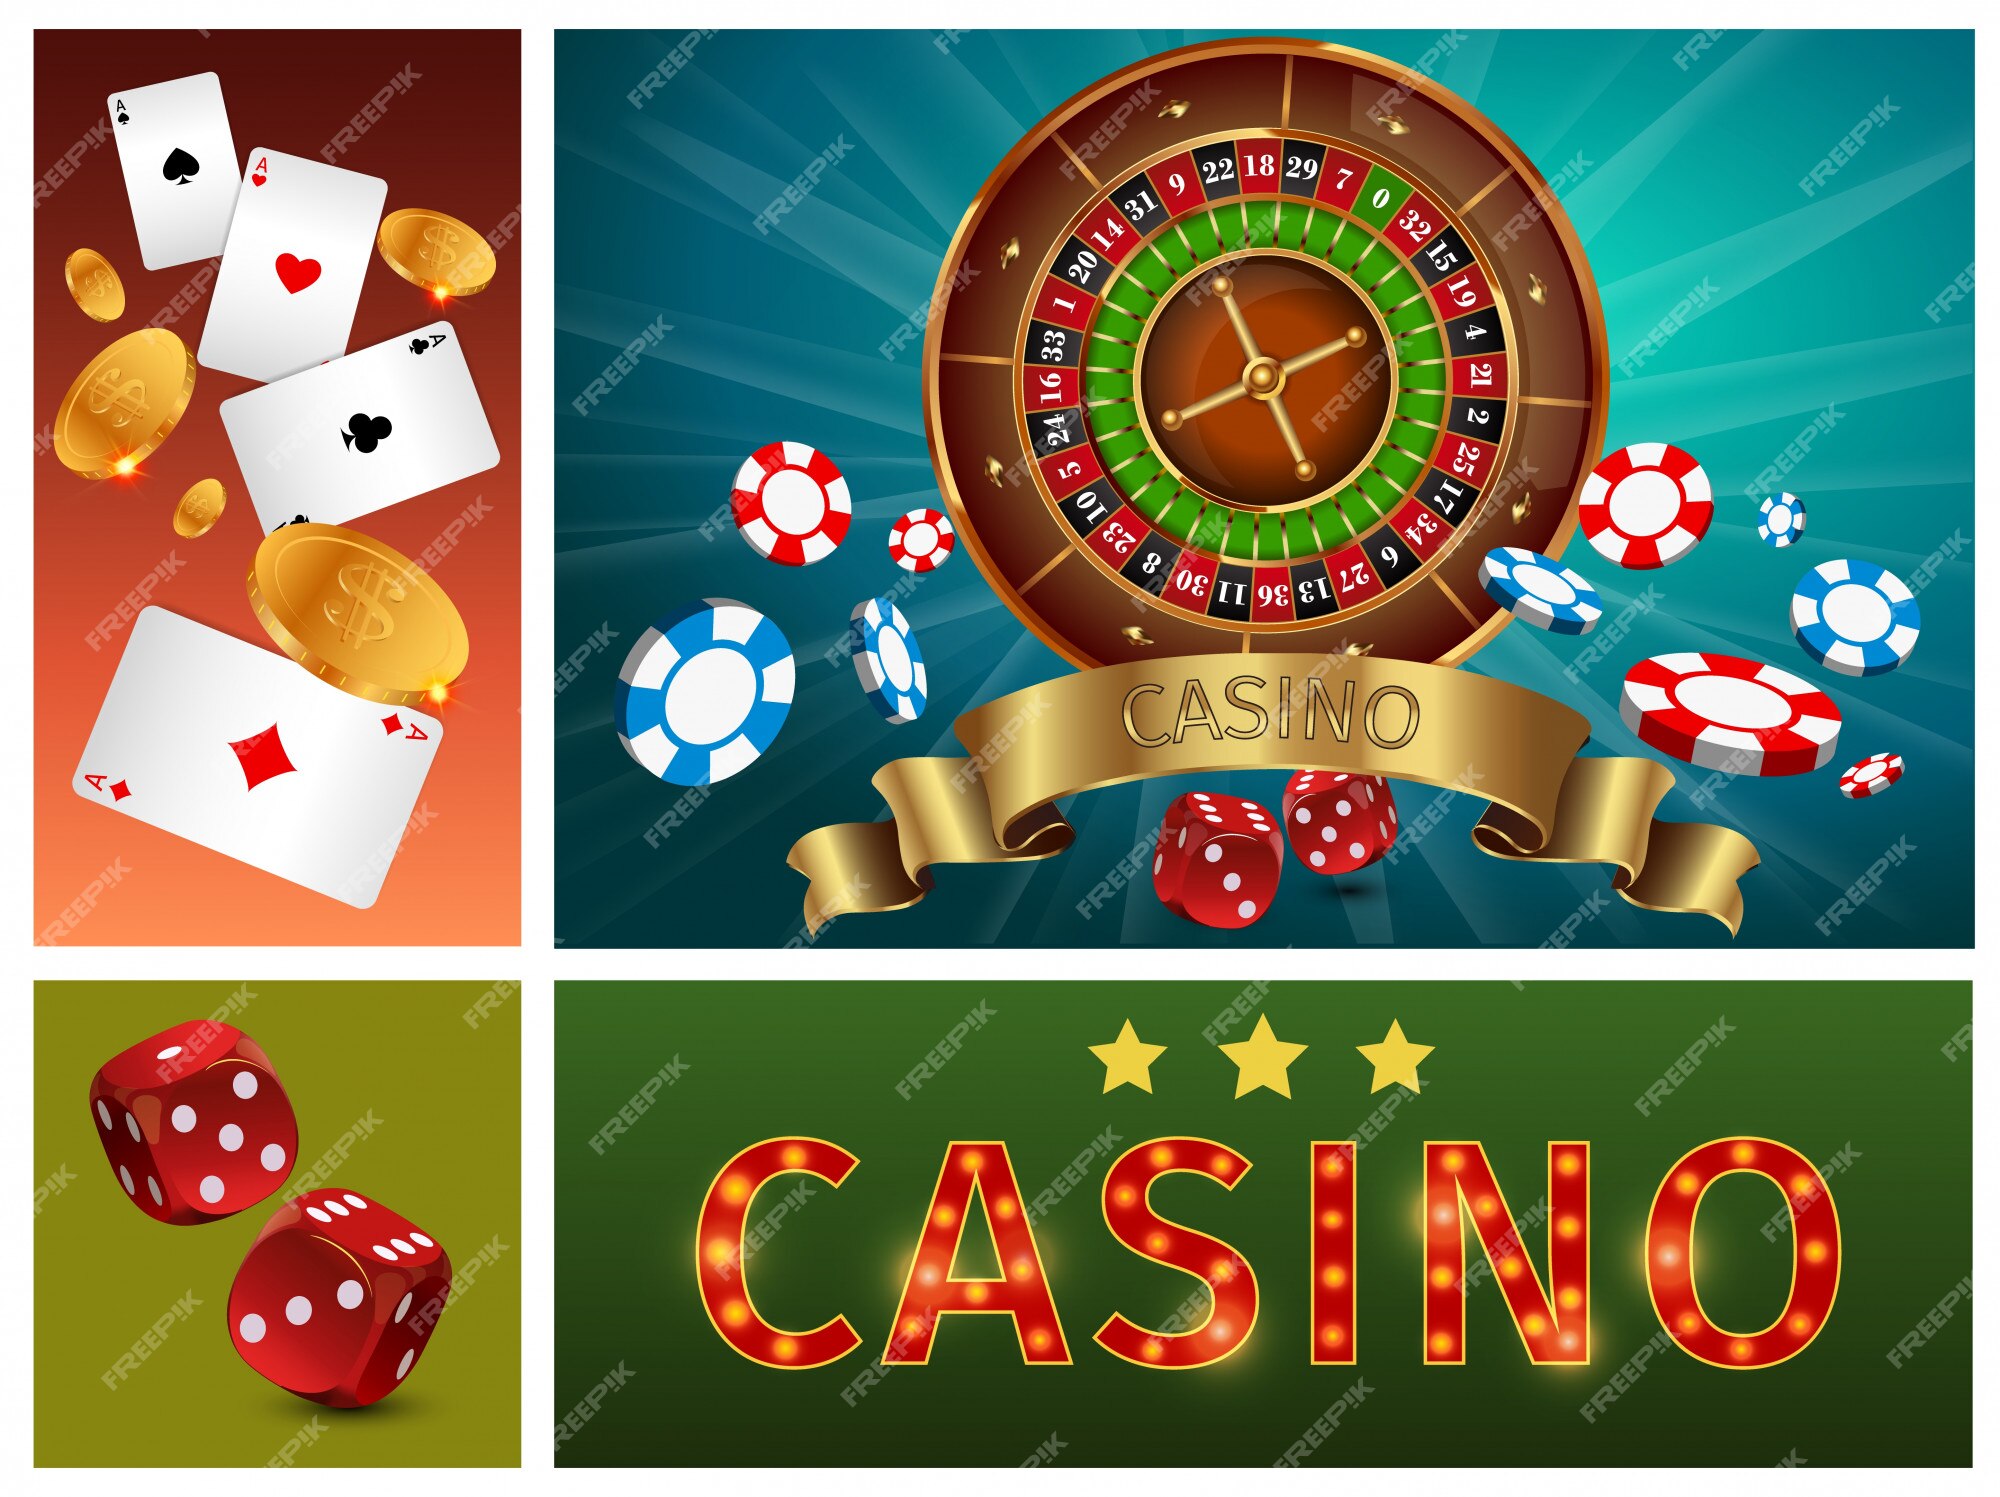 ‎Roulette - Casino Style on the App Store